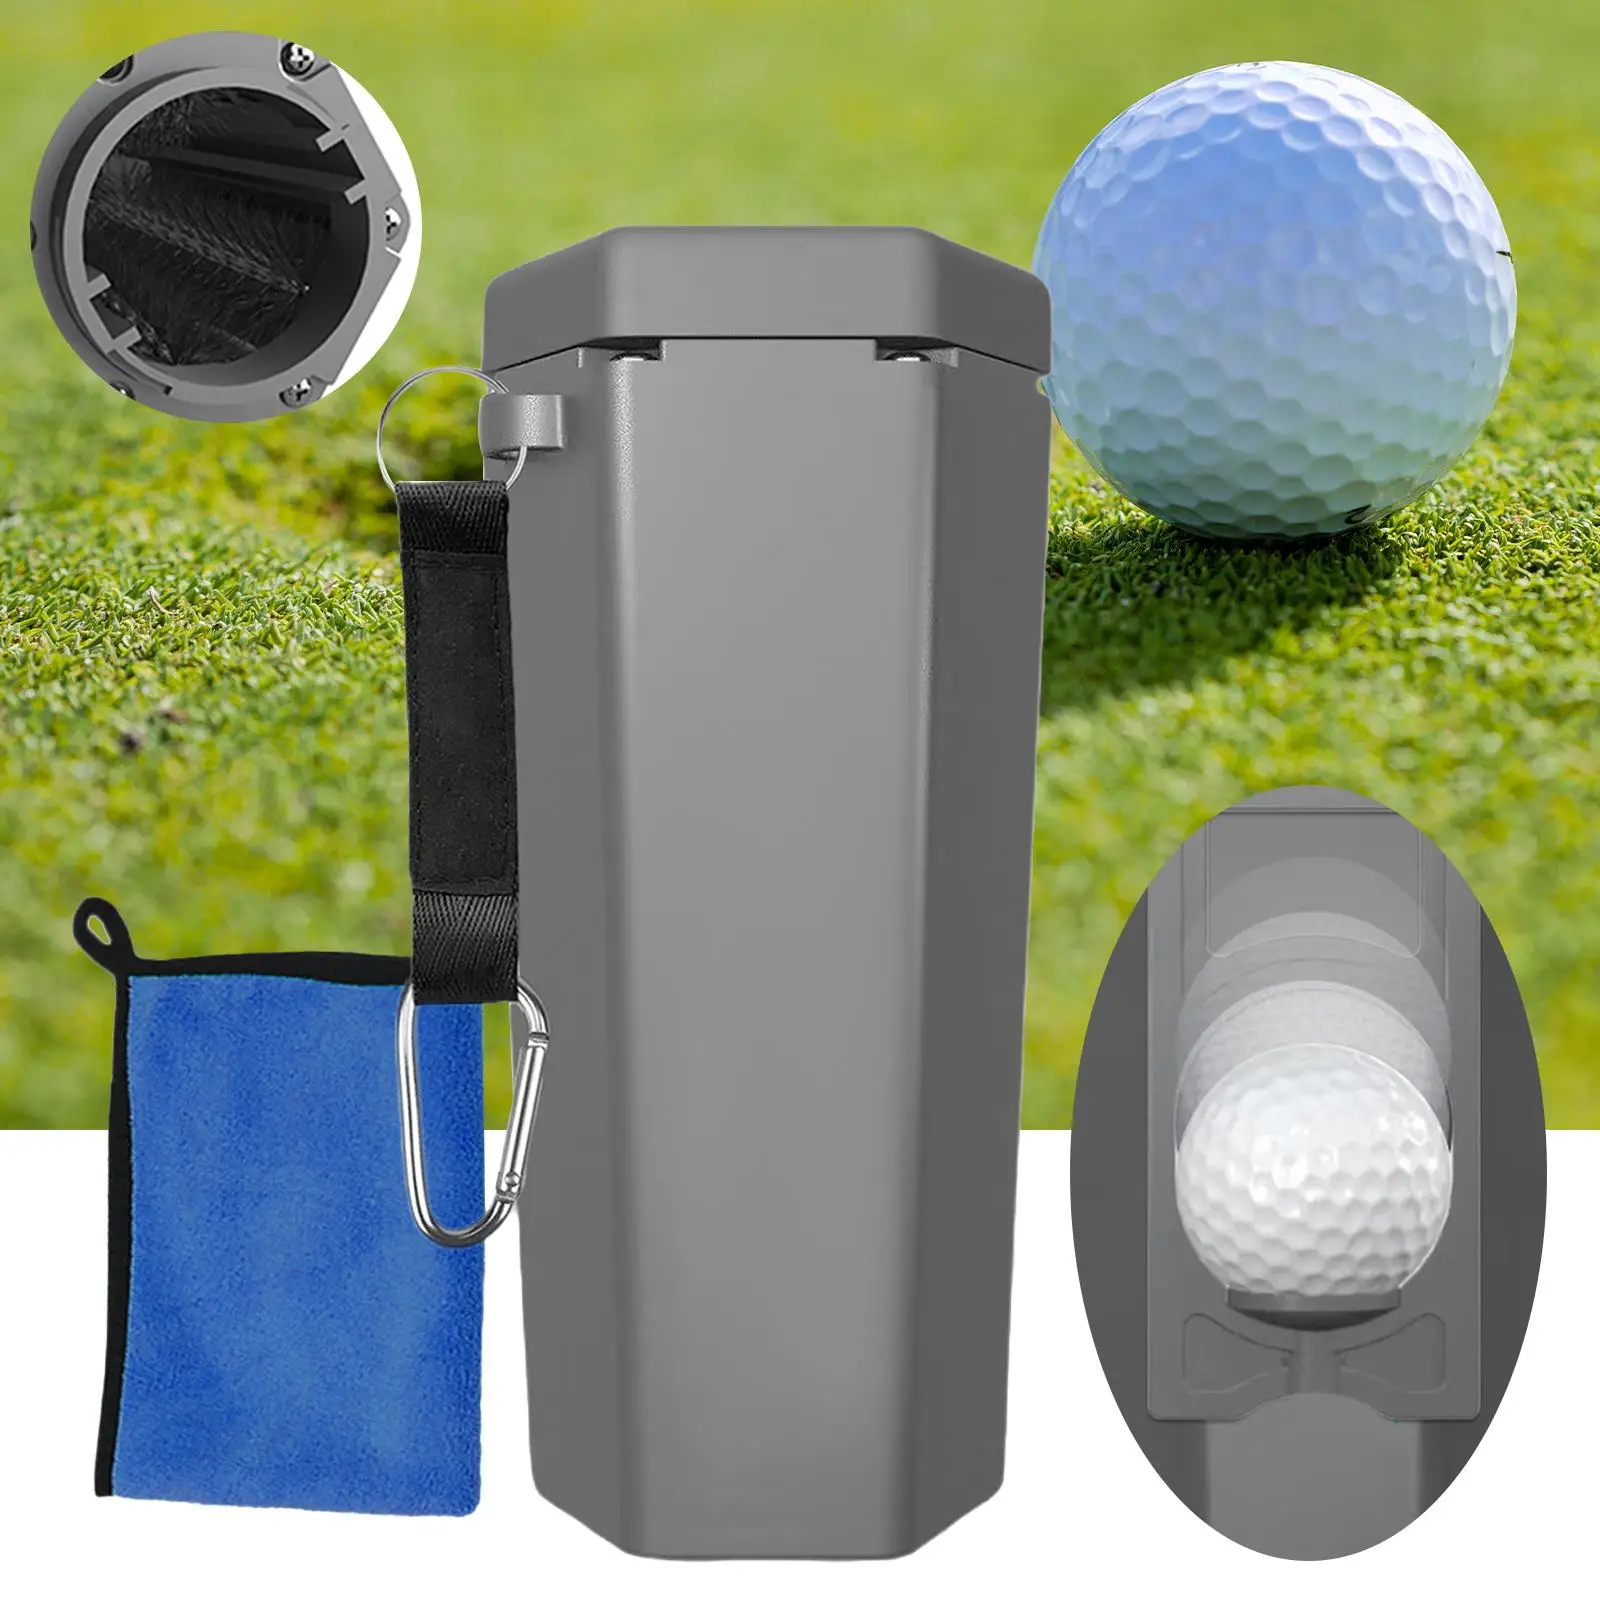 Golf Ball Washer Portable Multifunction Accessories Holder Unique Brush Cleaner for Cart Outdoor Colleagues Training Traveling